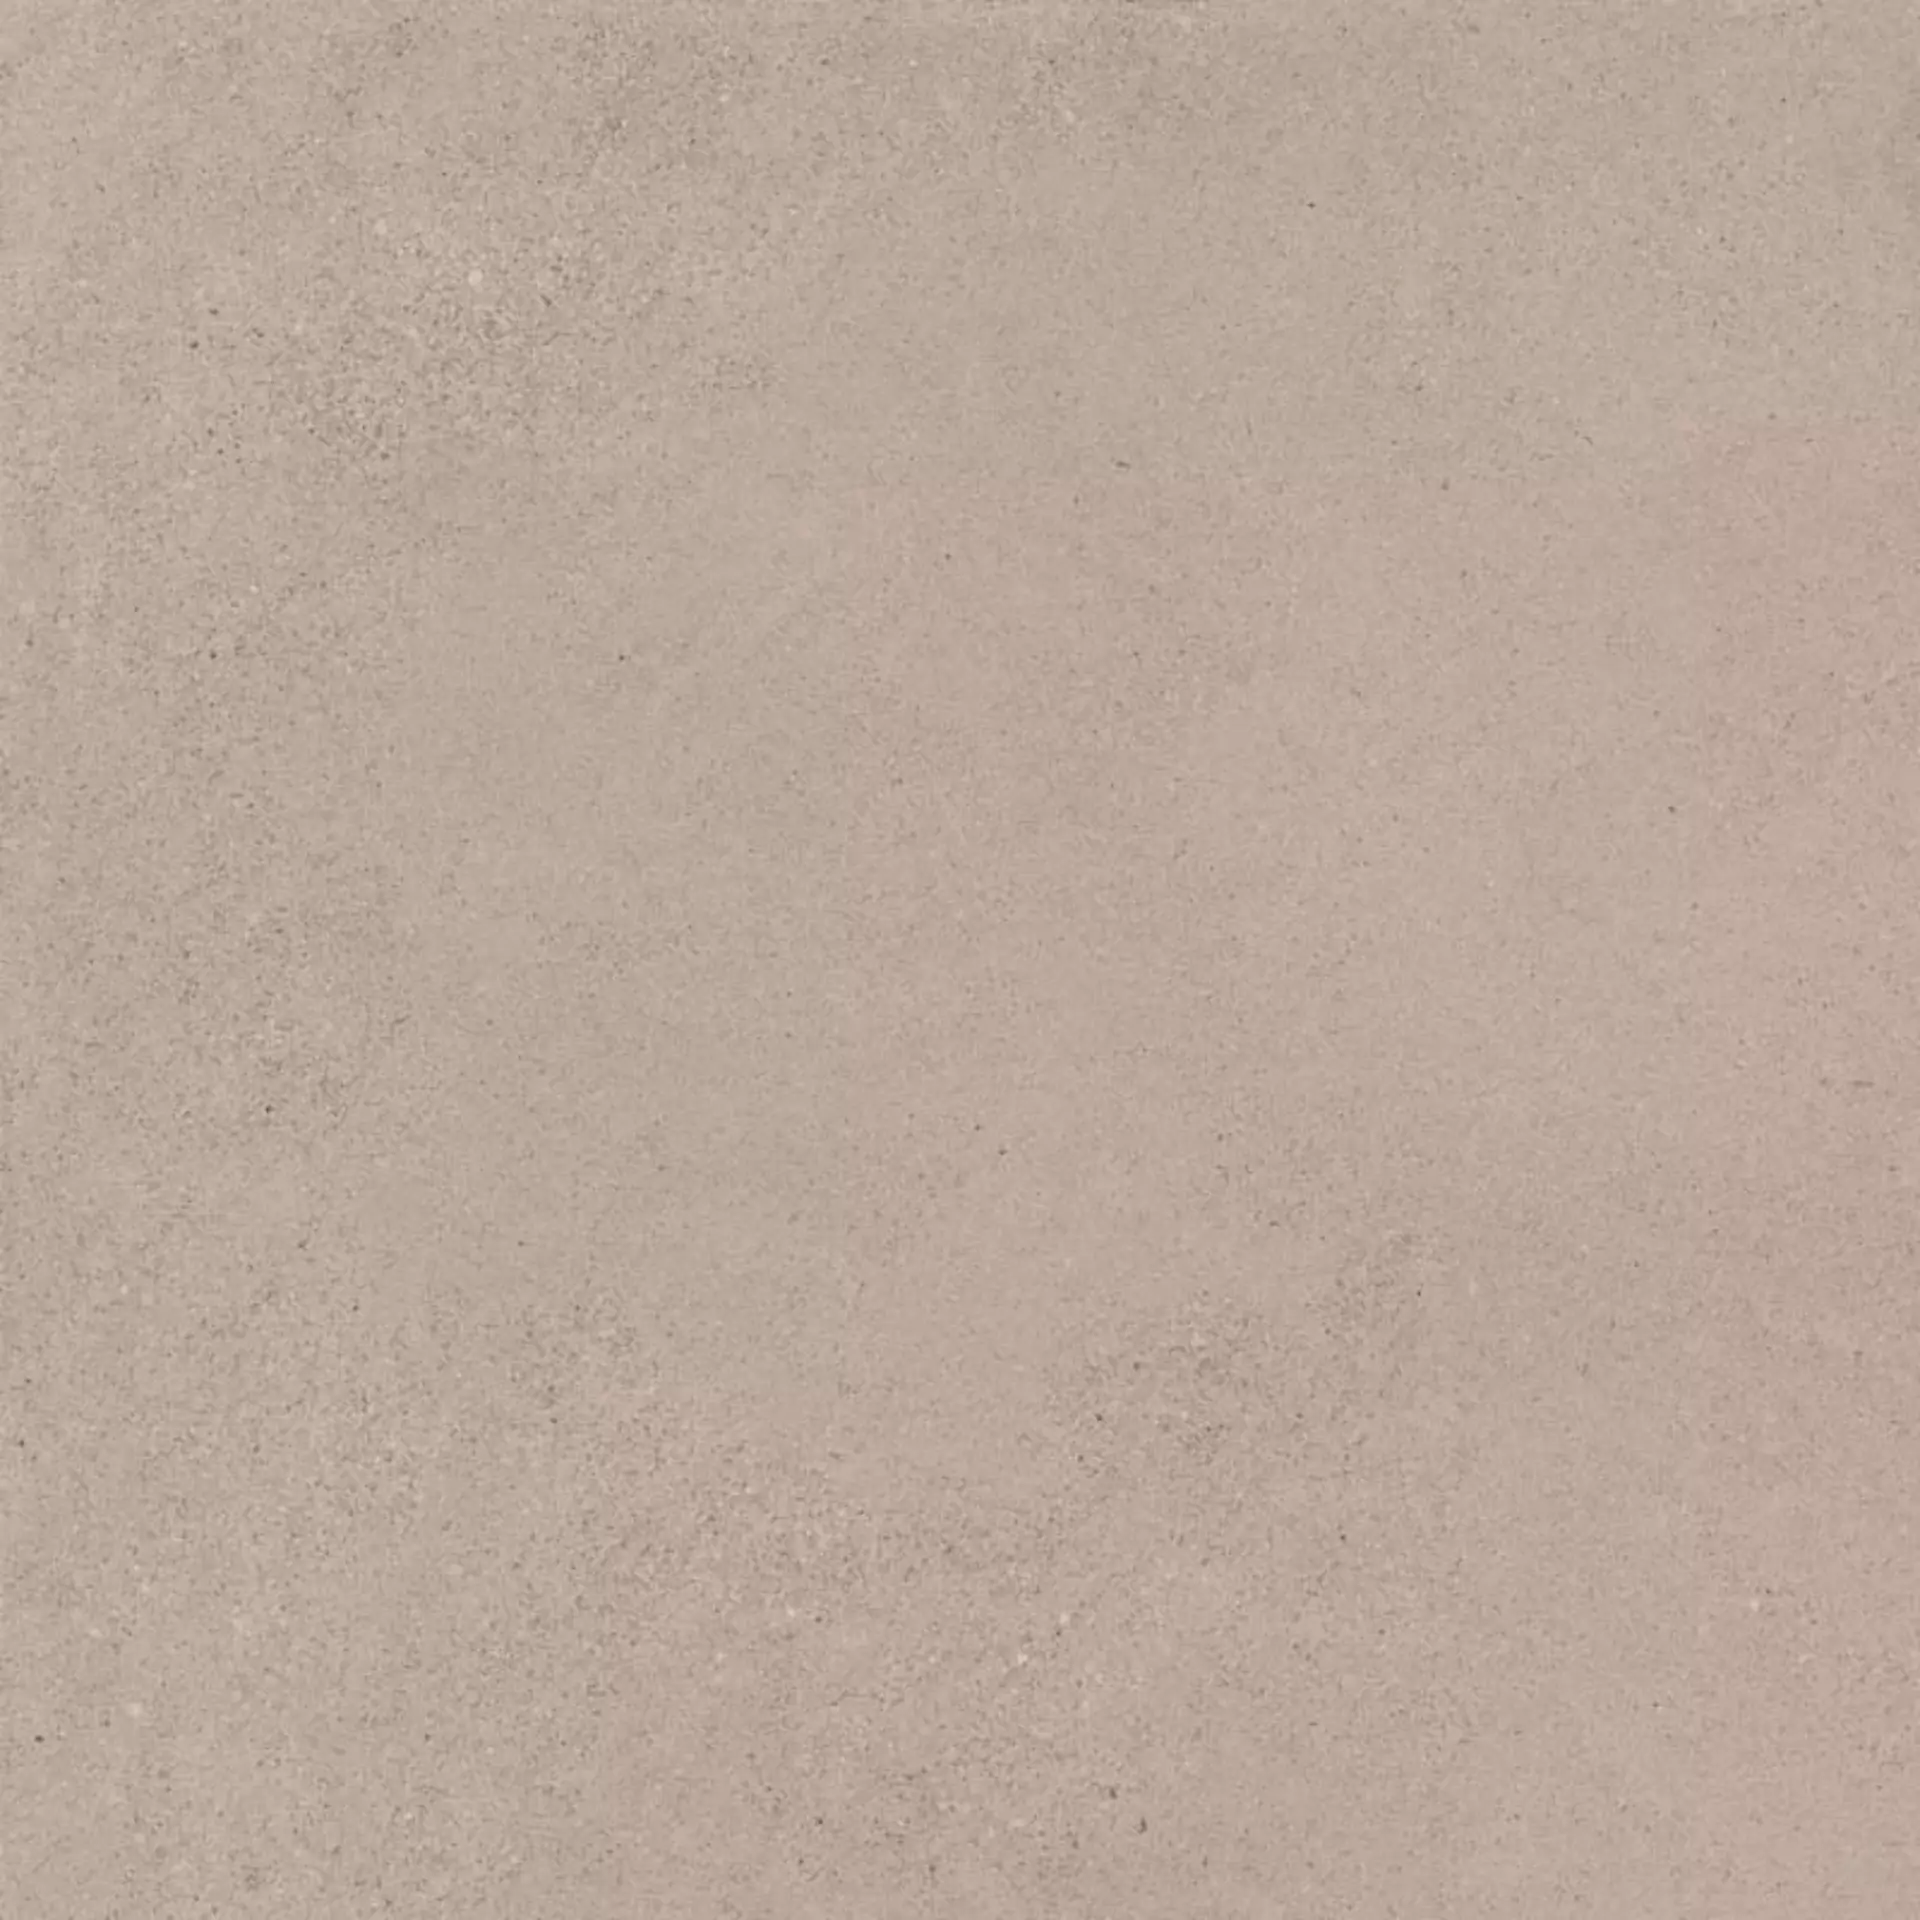 Sant Agostino Silkystone Taupe Natural CSASKSTA60 60x60cm rectified 10mm